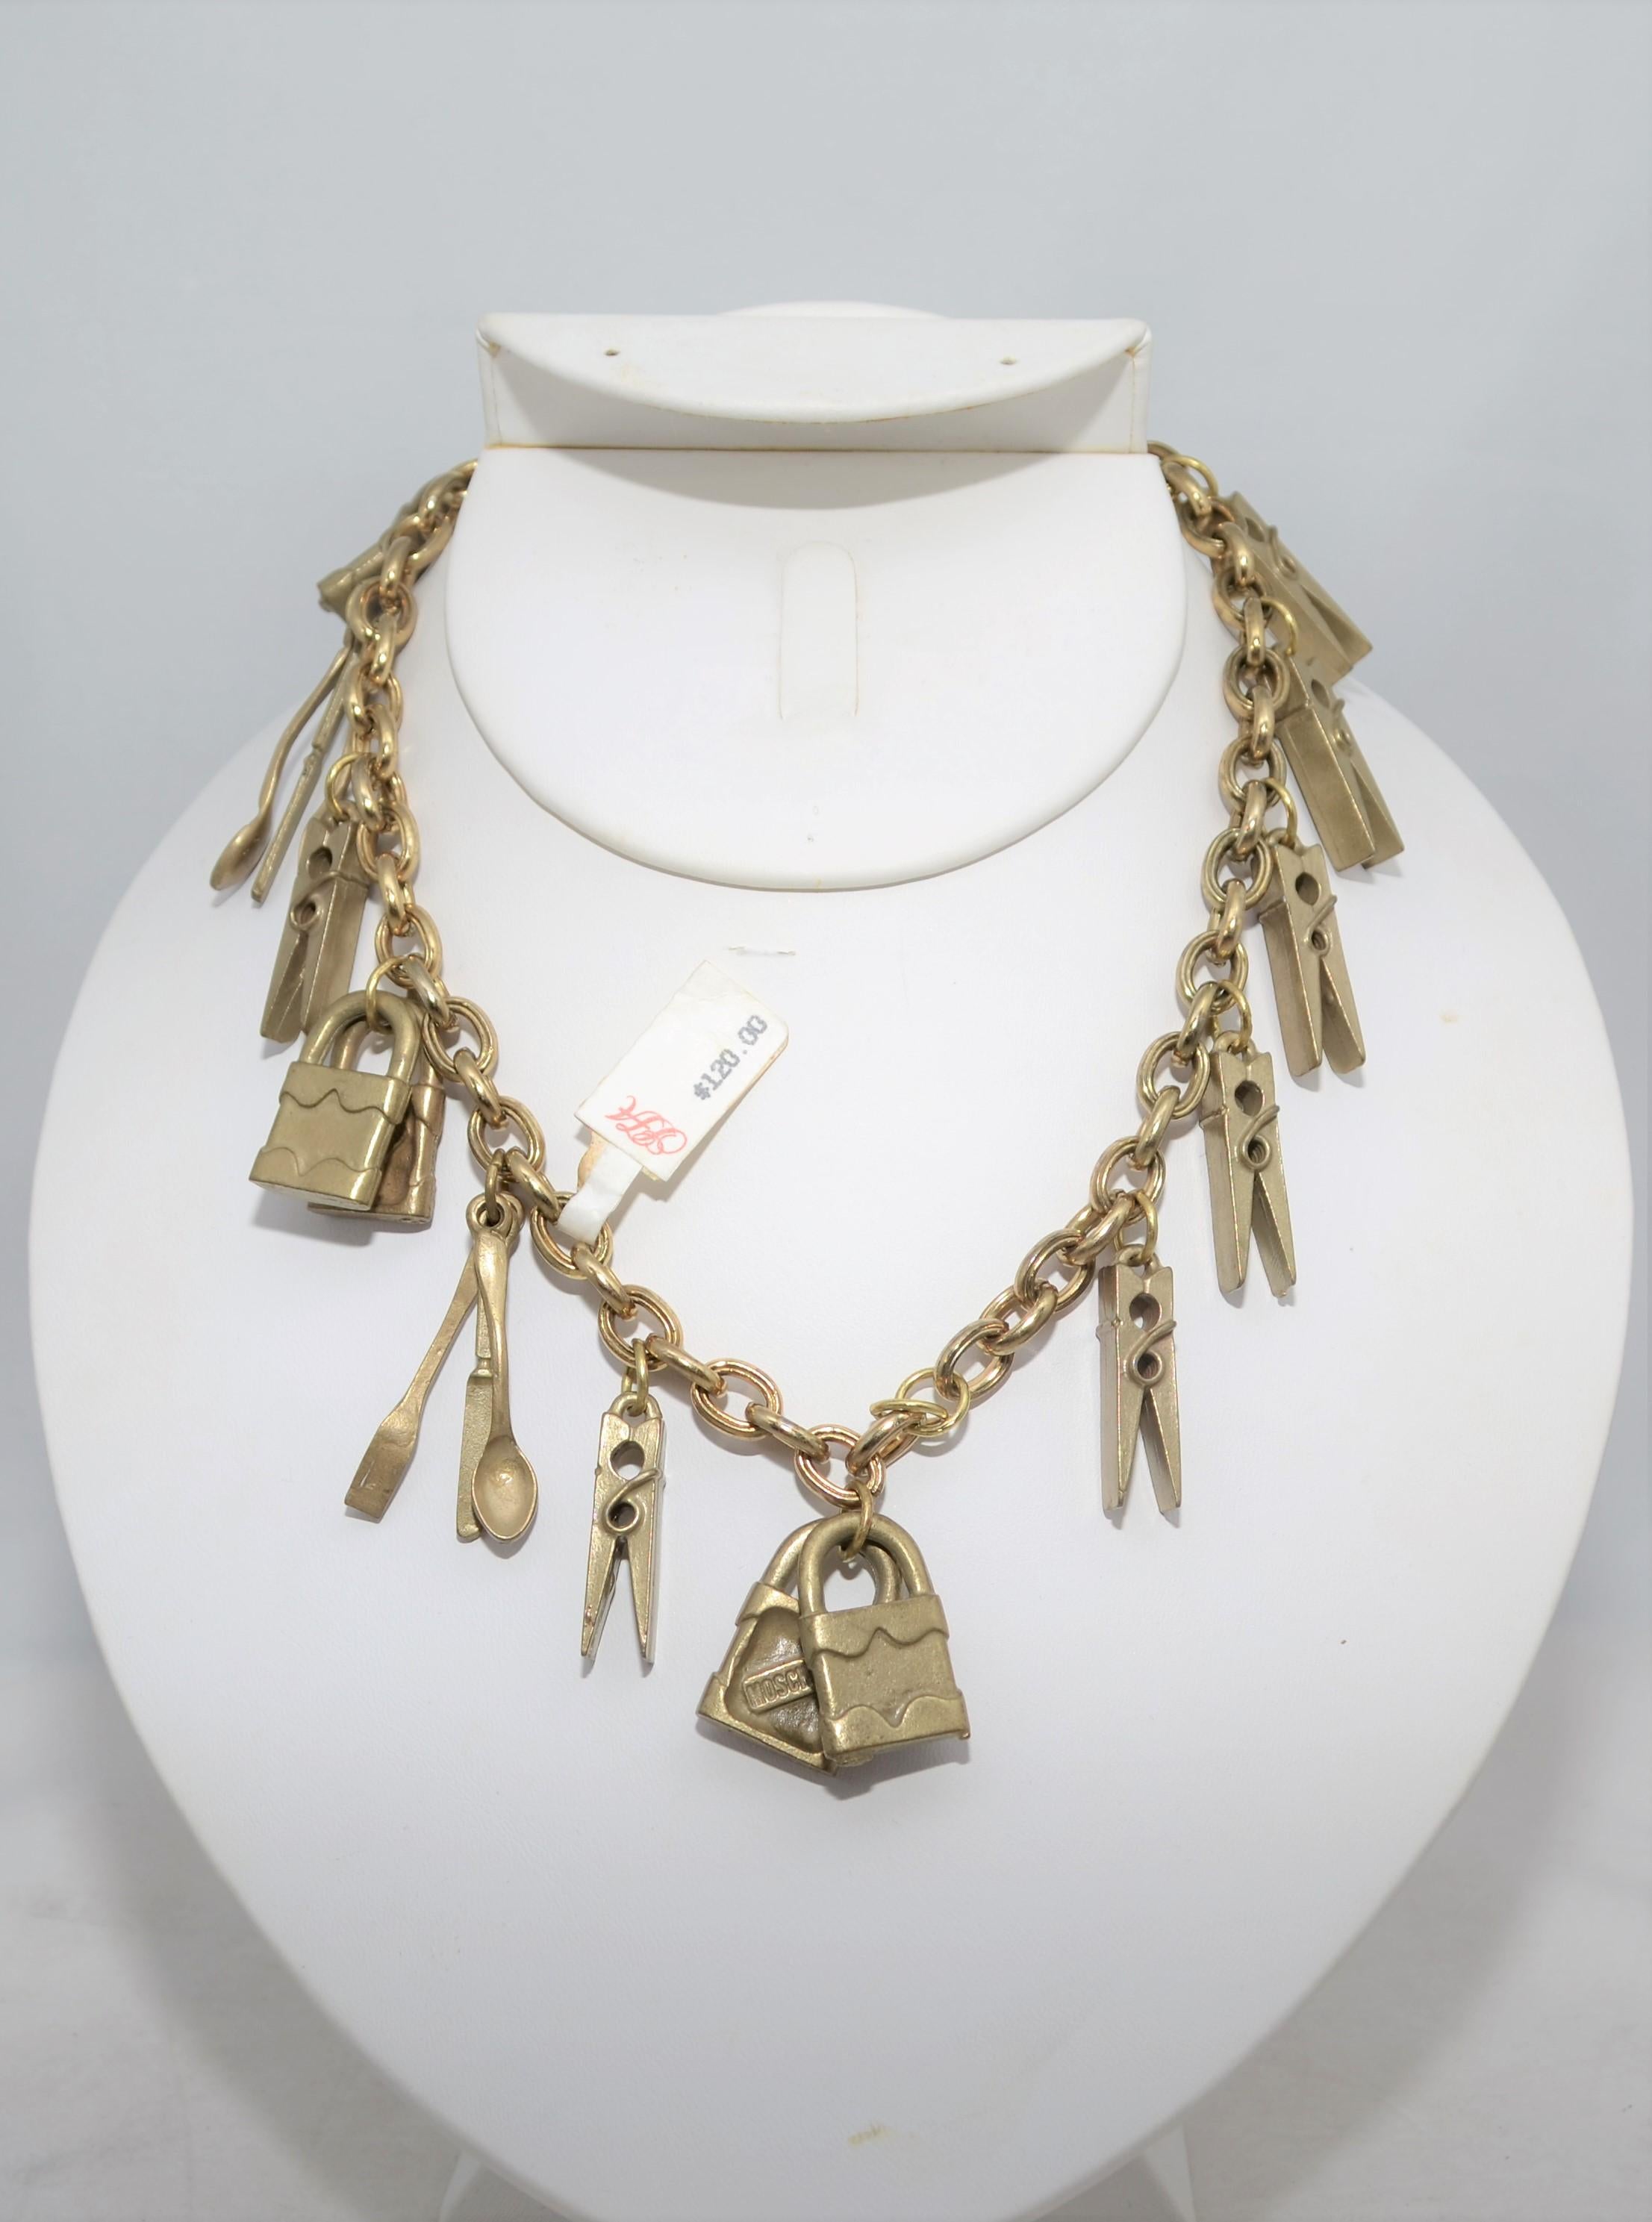 1990’s Moschino Vintage Chain Necklace with Padlock, Cutlery, and Clothespin Charms -- chain necklace is new with original tags and is featured in a brushed gold metal with fun assorted charms and a spring clasp closure. Chain length 15 inches.